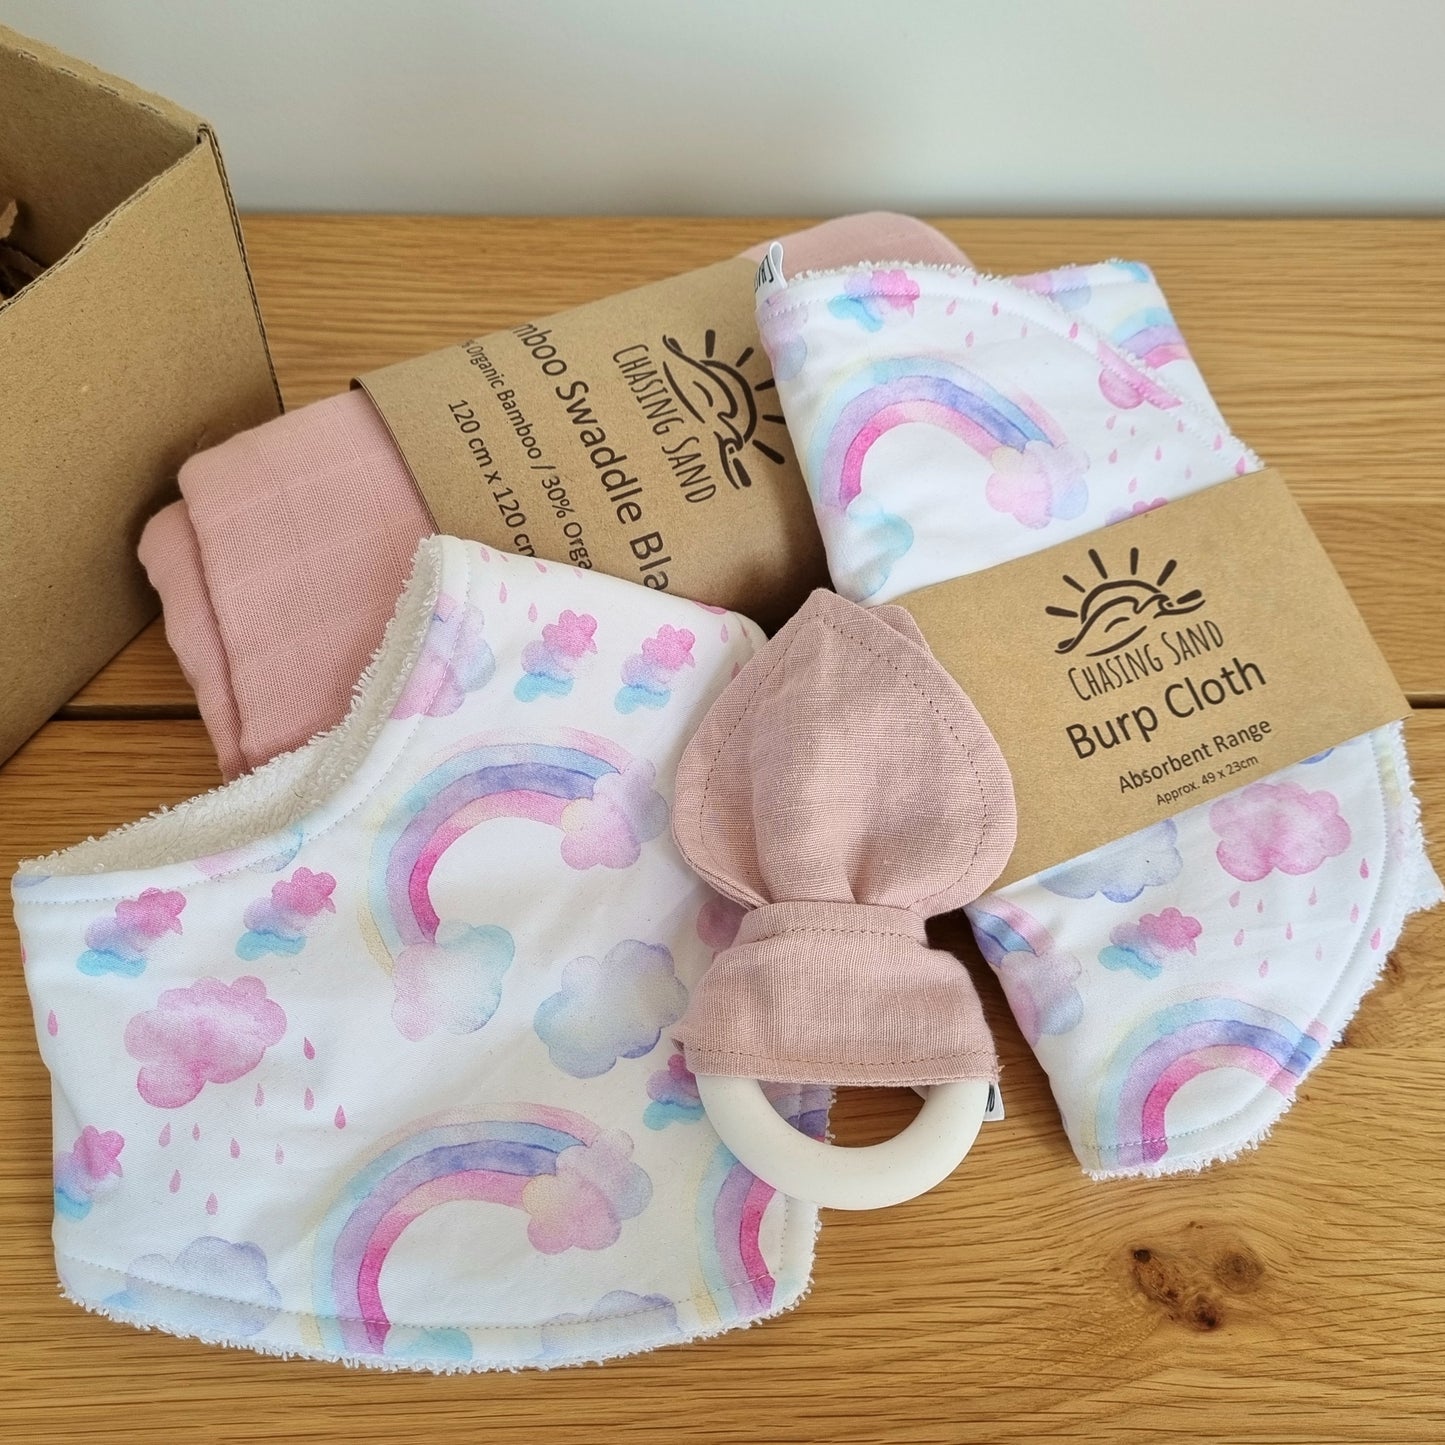 For Baby Swaddle Gift Box - Rainbow Fun